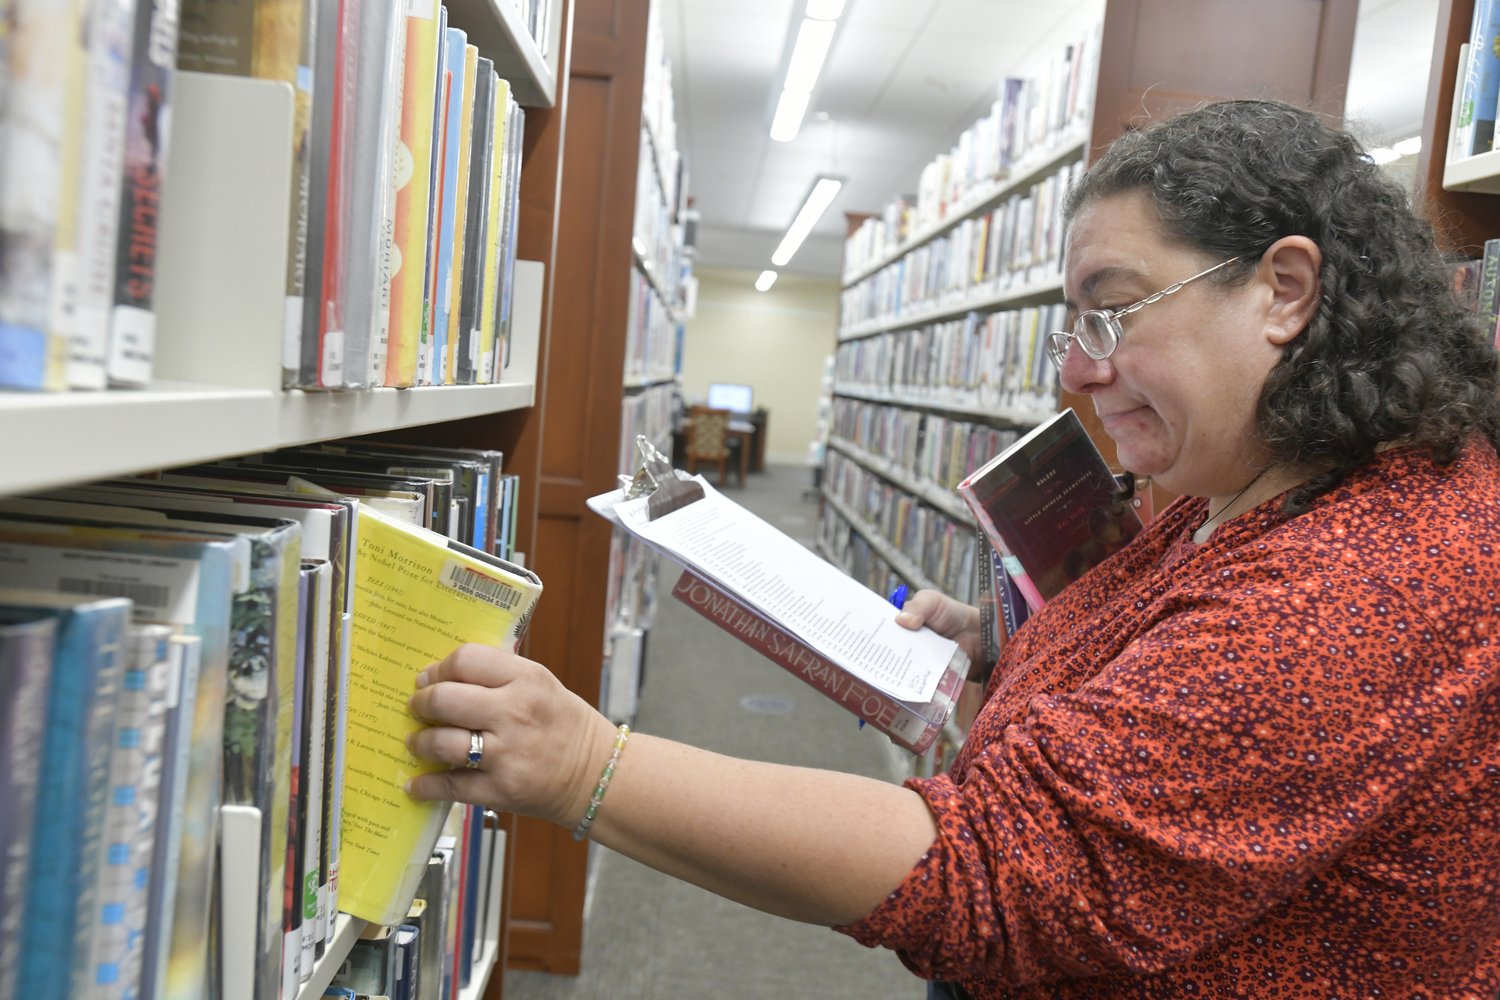 Mara Zonderman, the head of reference and adult services, scans the shelves on Friday afternoon, moving from department to department with a list over 500 titles long, pulling picture books and chapter books, children’s graphic novels, young adult reads, adult fiction and non-fiction alike.   DANA SHAW